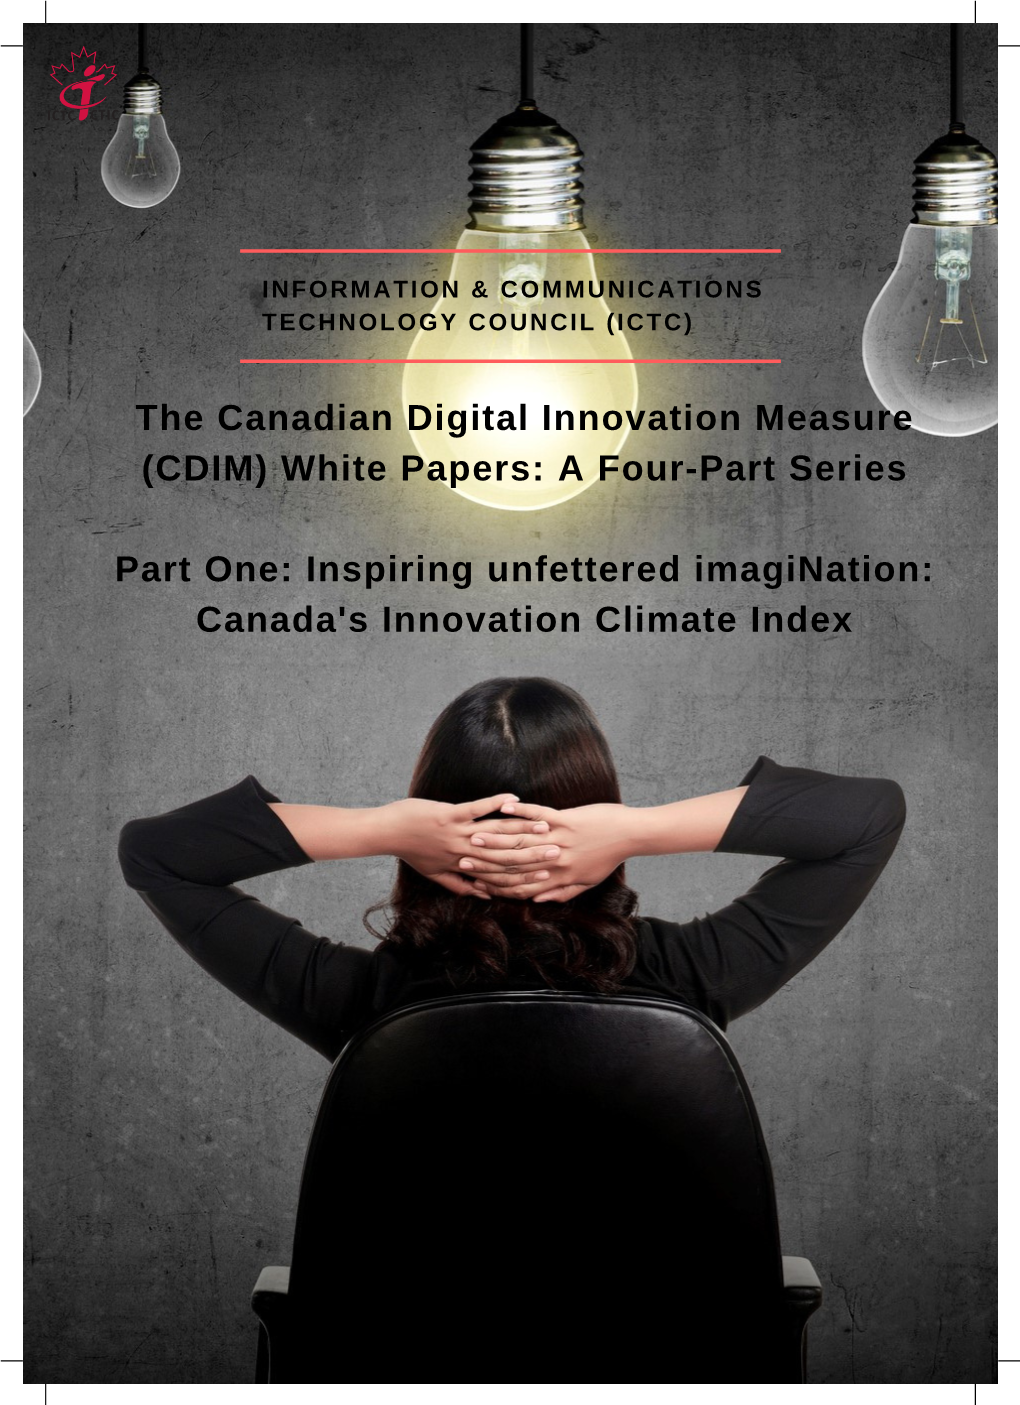 Canadian Digital Innovation Measure (CDIM) White Papers: a Four-Part Series